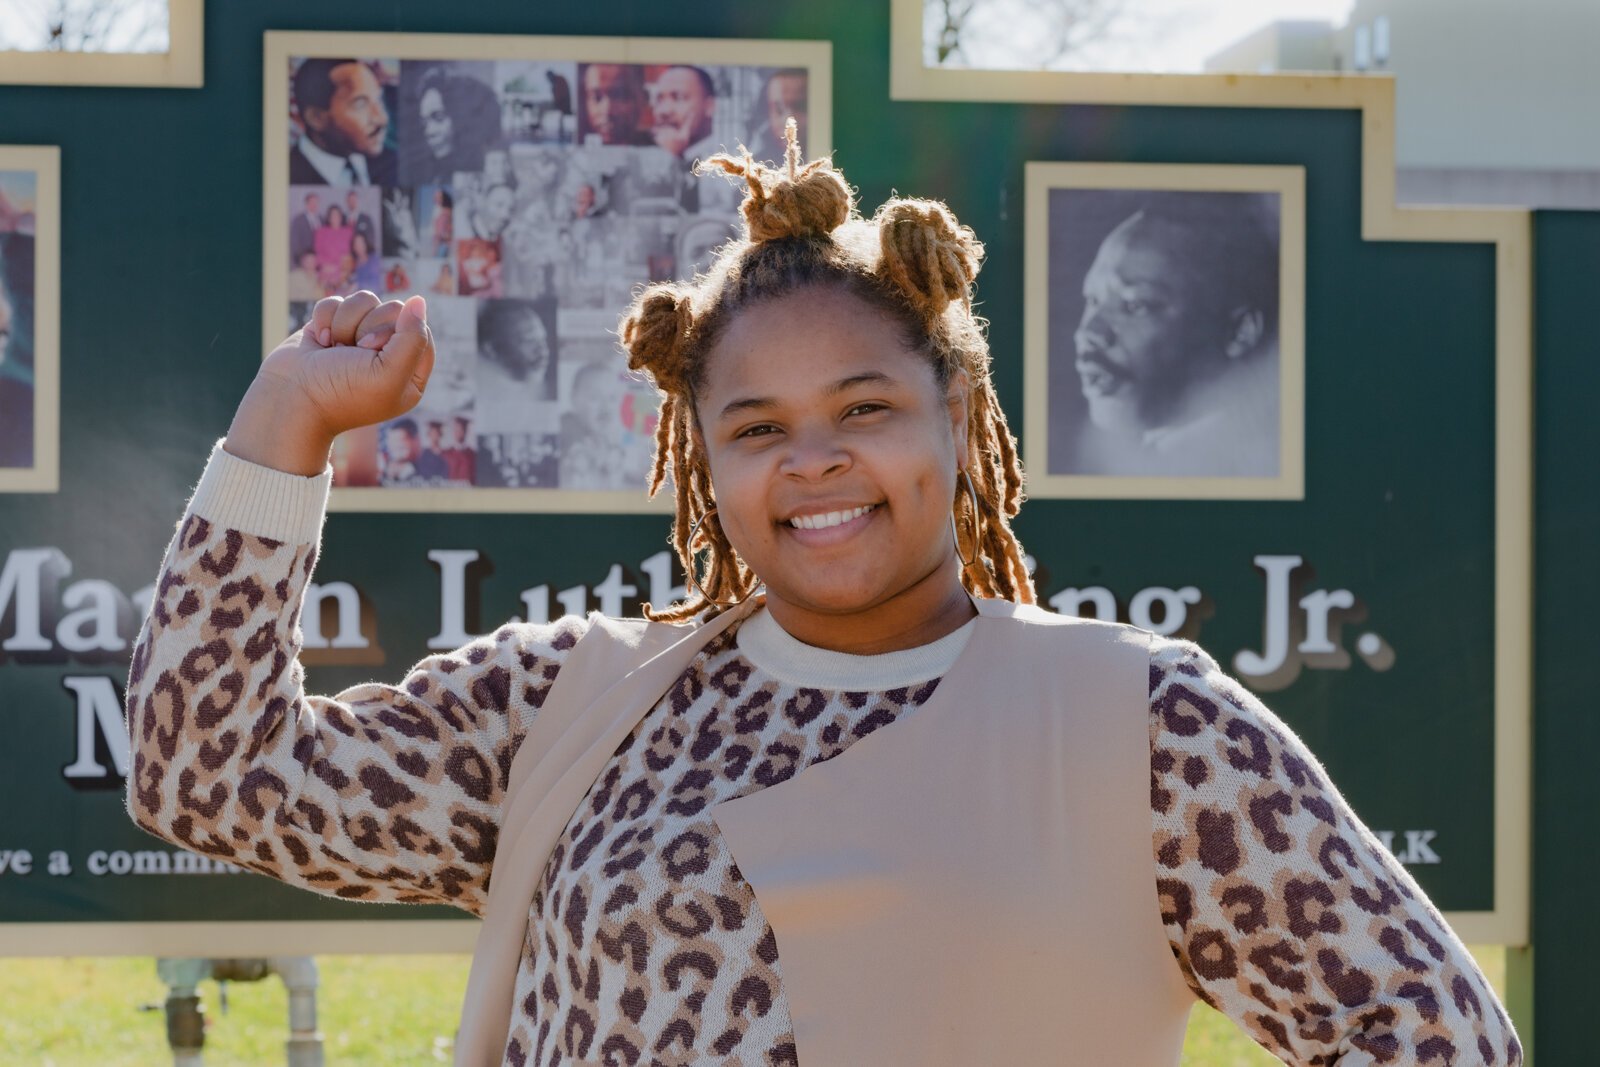 For Khadijah Brown her work with Uplift Kalamazoo has been “almost like a call to action.”